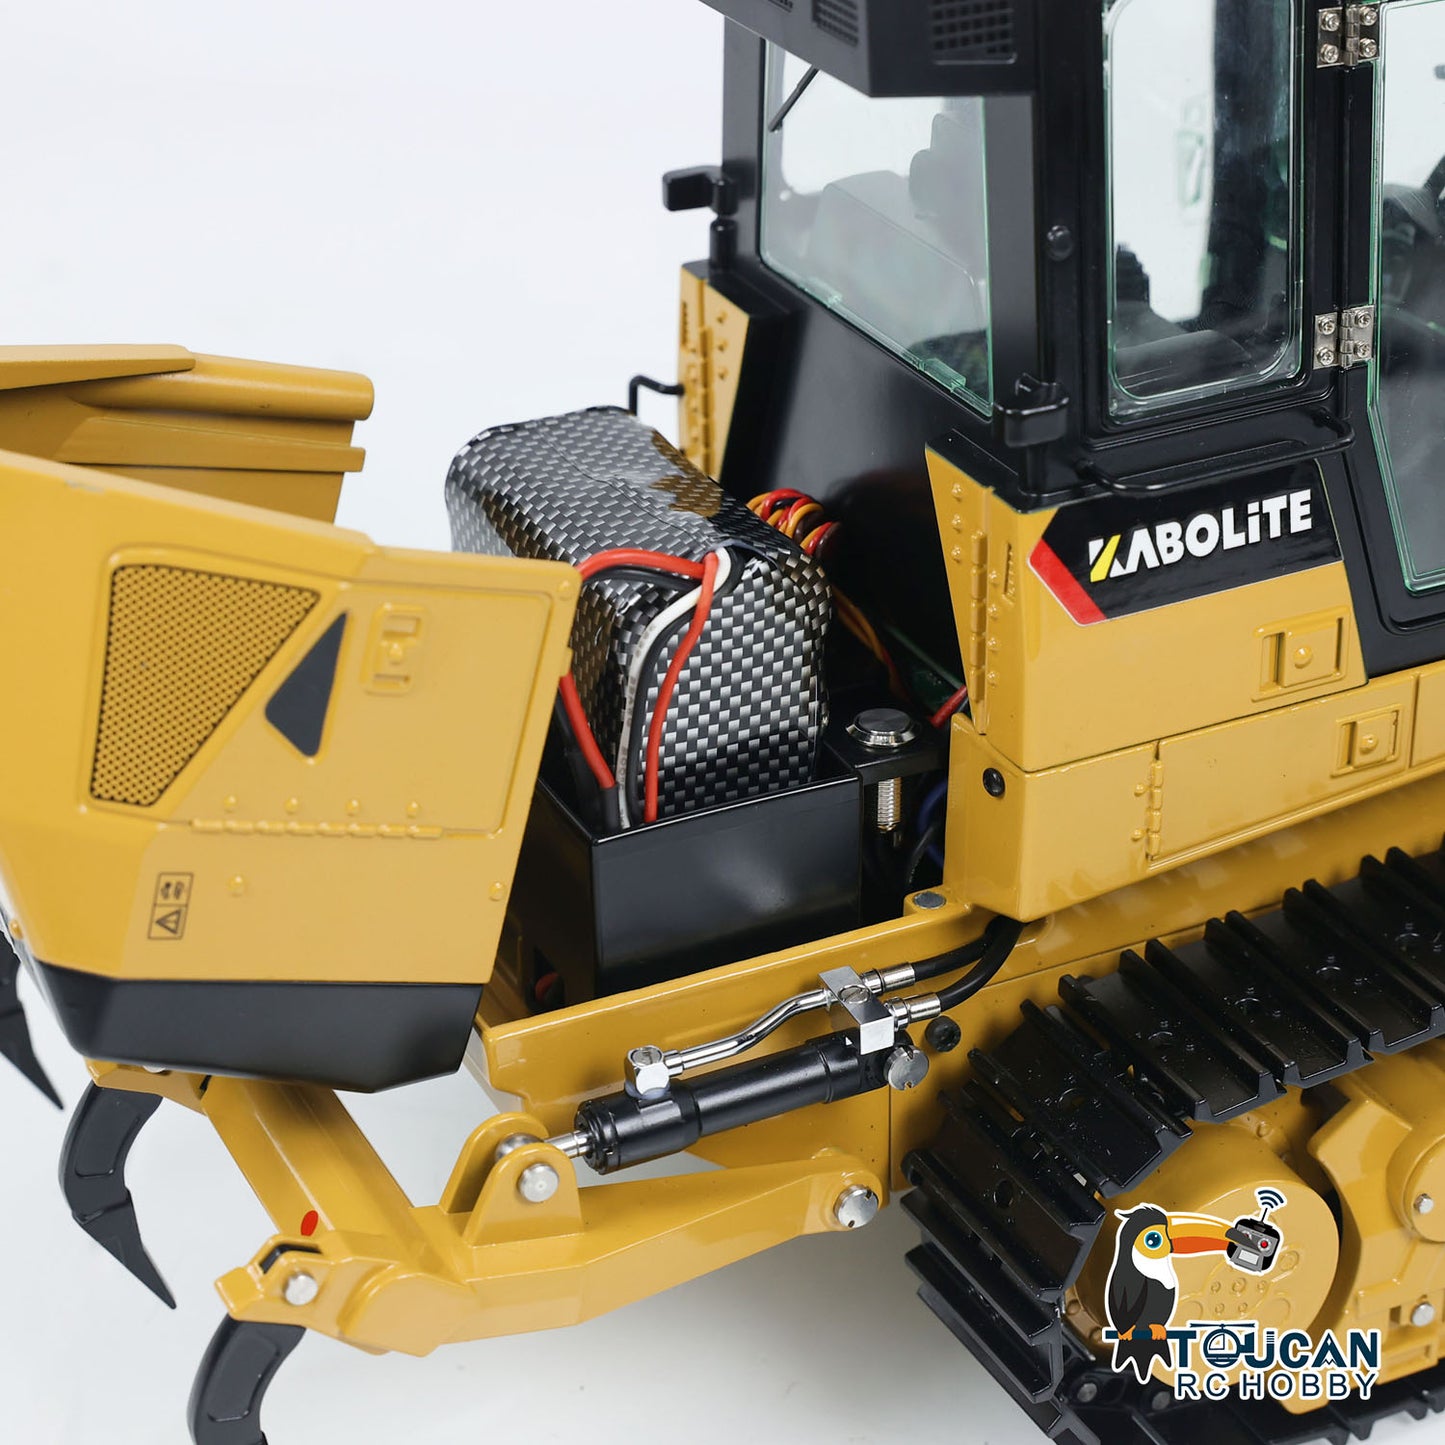 Kabolite 1/16 Hydraulic RC Loader K963-100 Remote Control Construction Vehicles